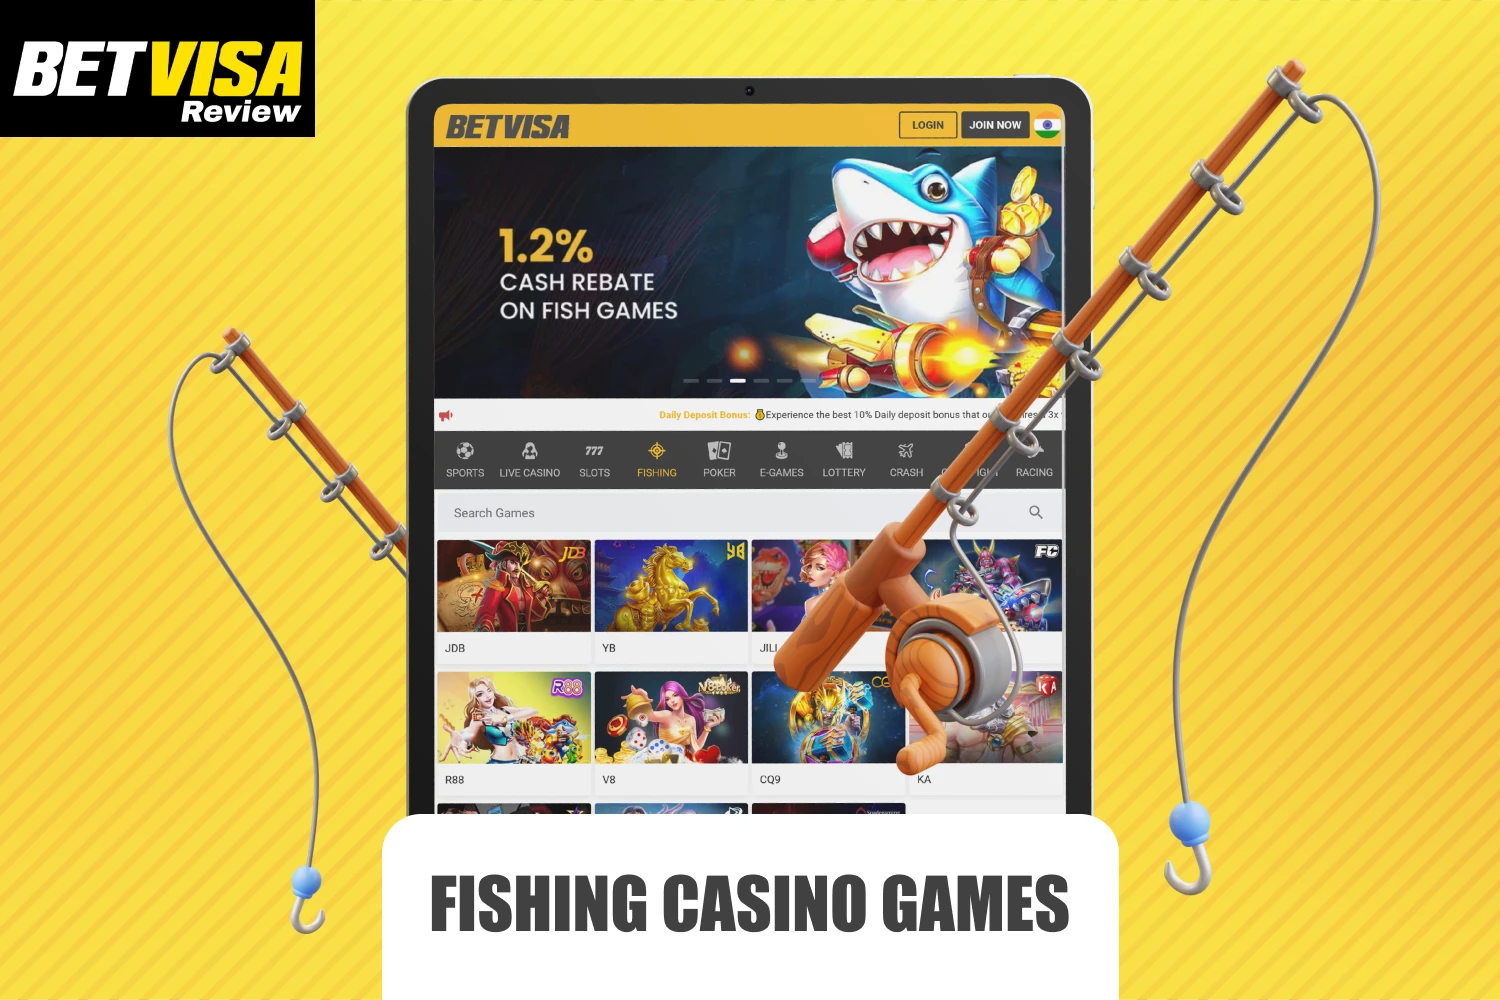 Fishing games at Betvisa combine the strategy and excitement of virtual fishing, which is why they are very popular among indies